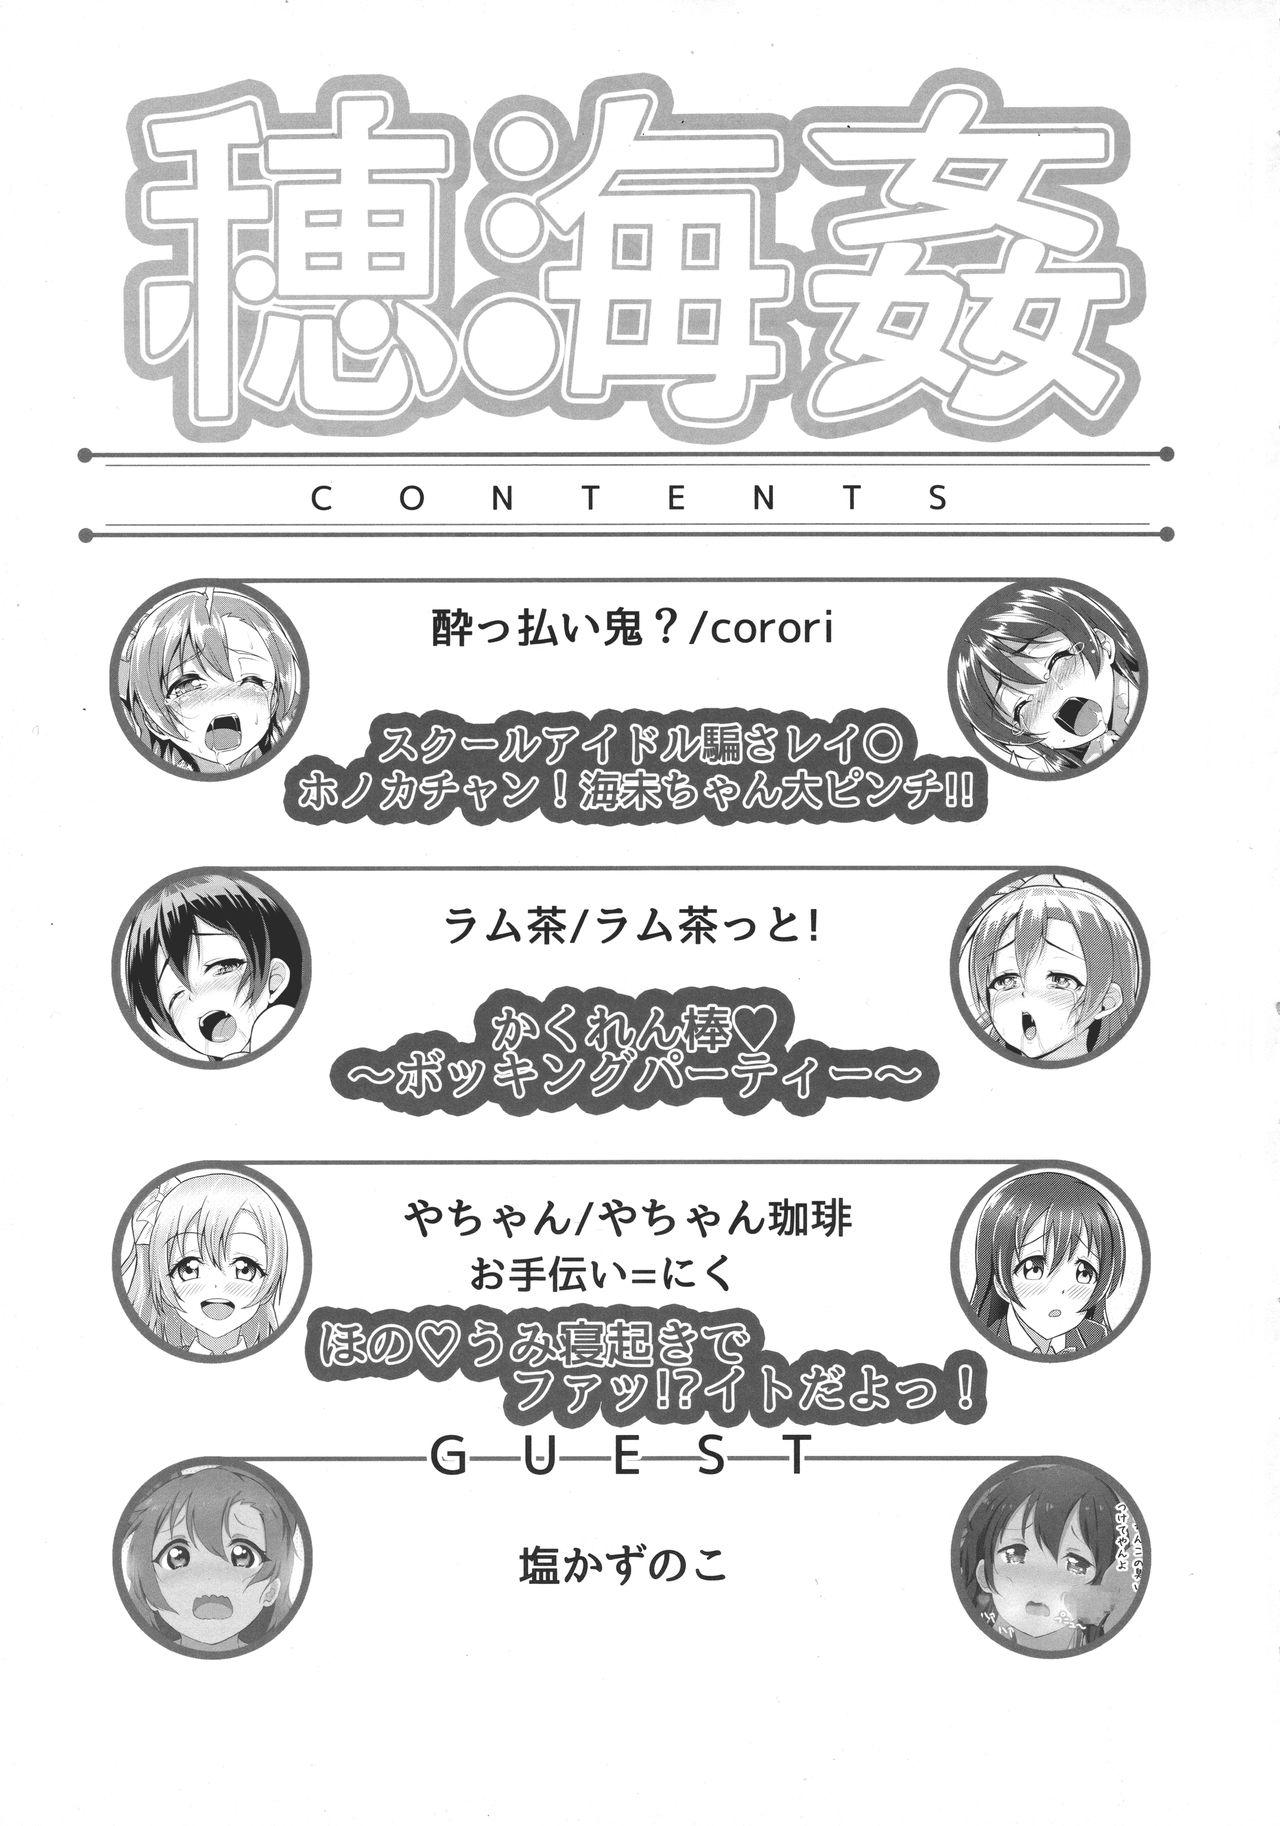 Leche HONOUMIKAN - Love live Game - Page 4